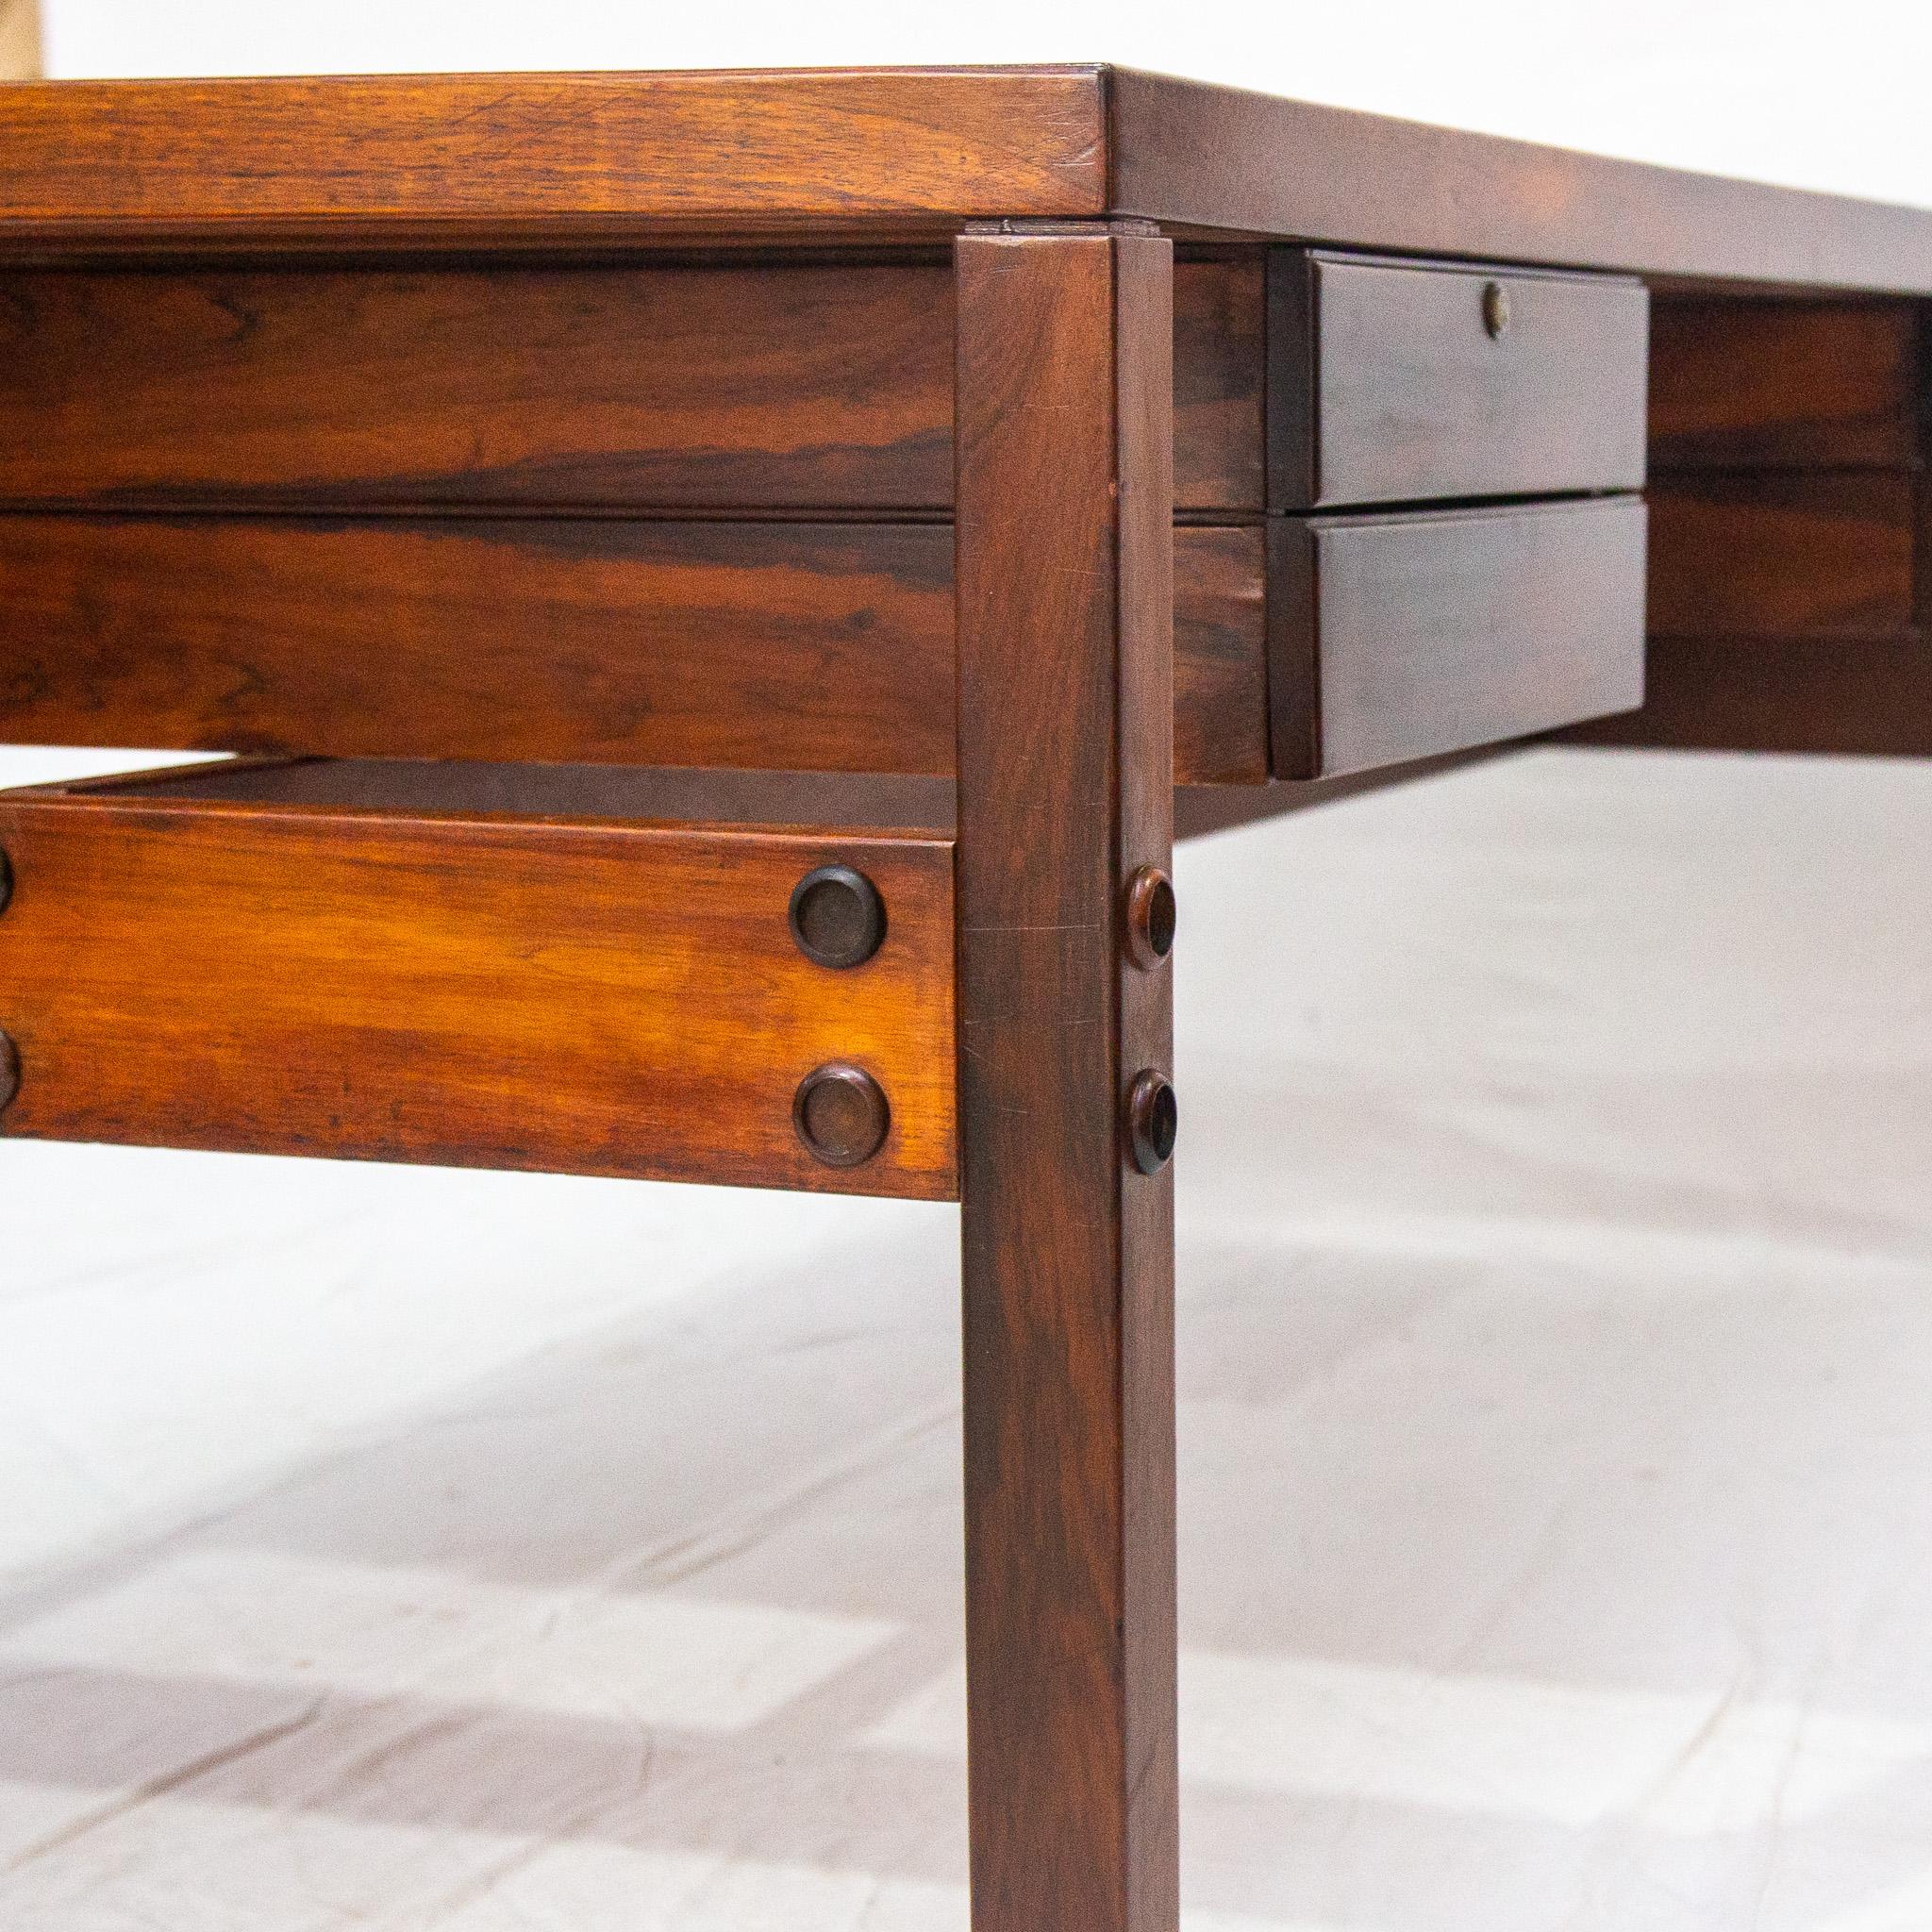 Brazilian Modern Desk in Hardwood with Floating Drawers, Sergio Rodrigues, 1960s For Sale 9